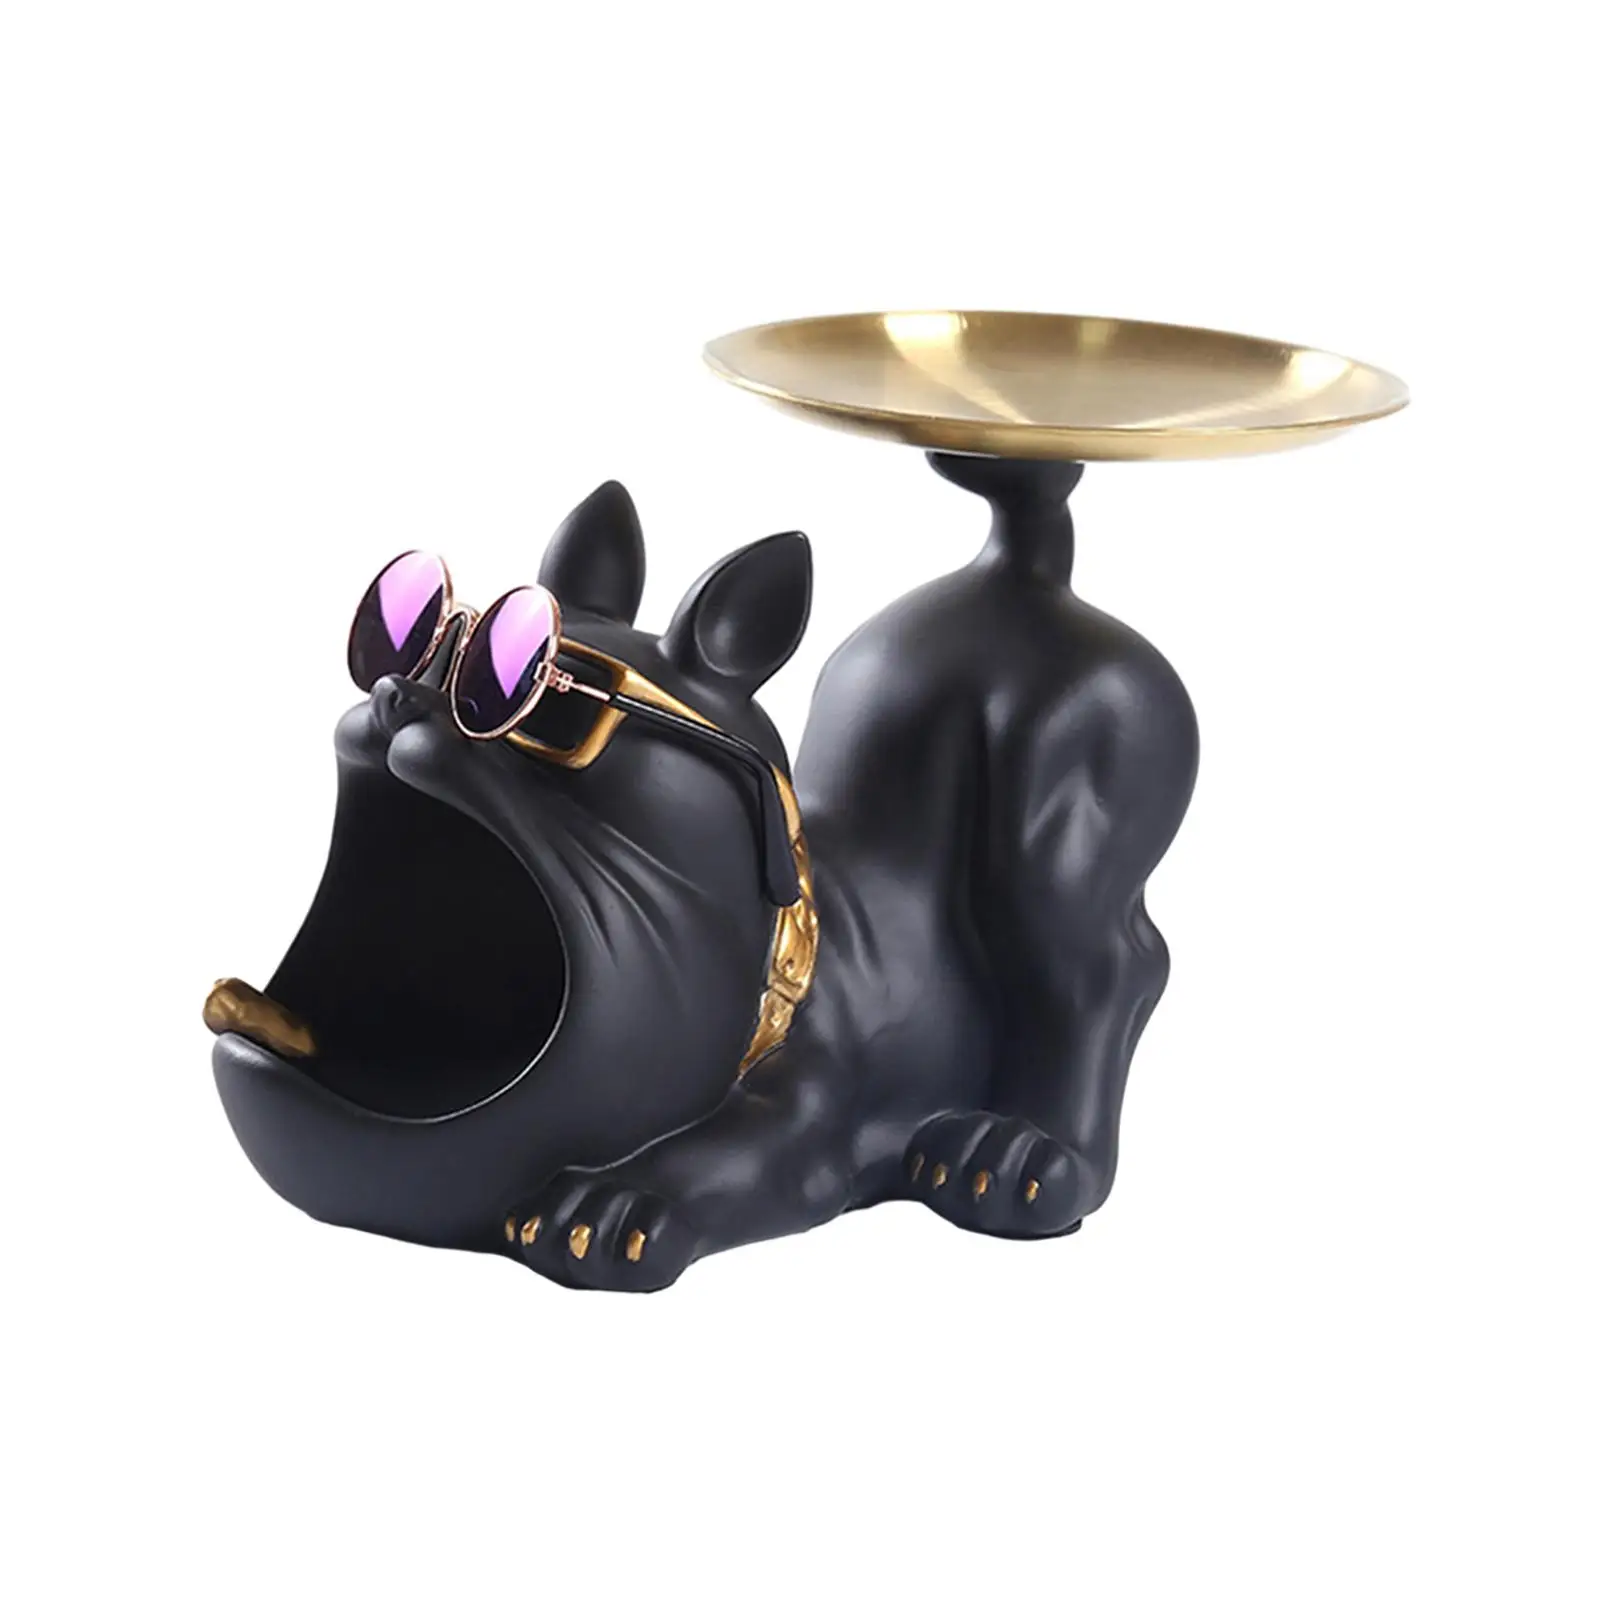 Dog Storage Tray Statue Fashion Collectible Figurine for Home Table Office